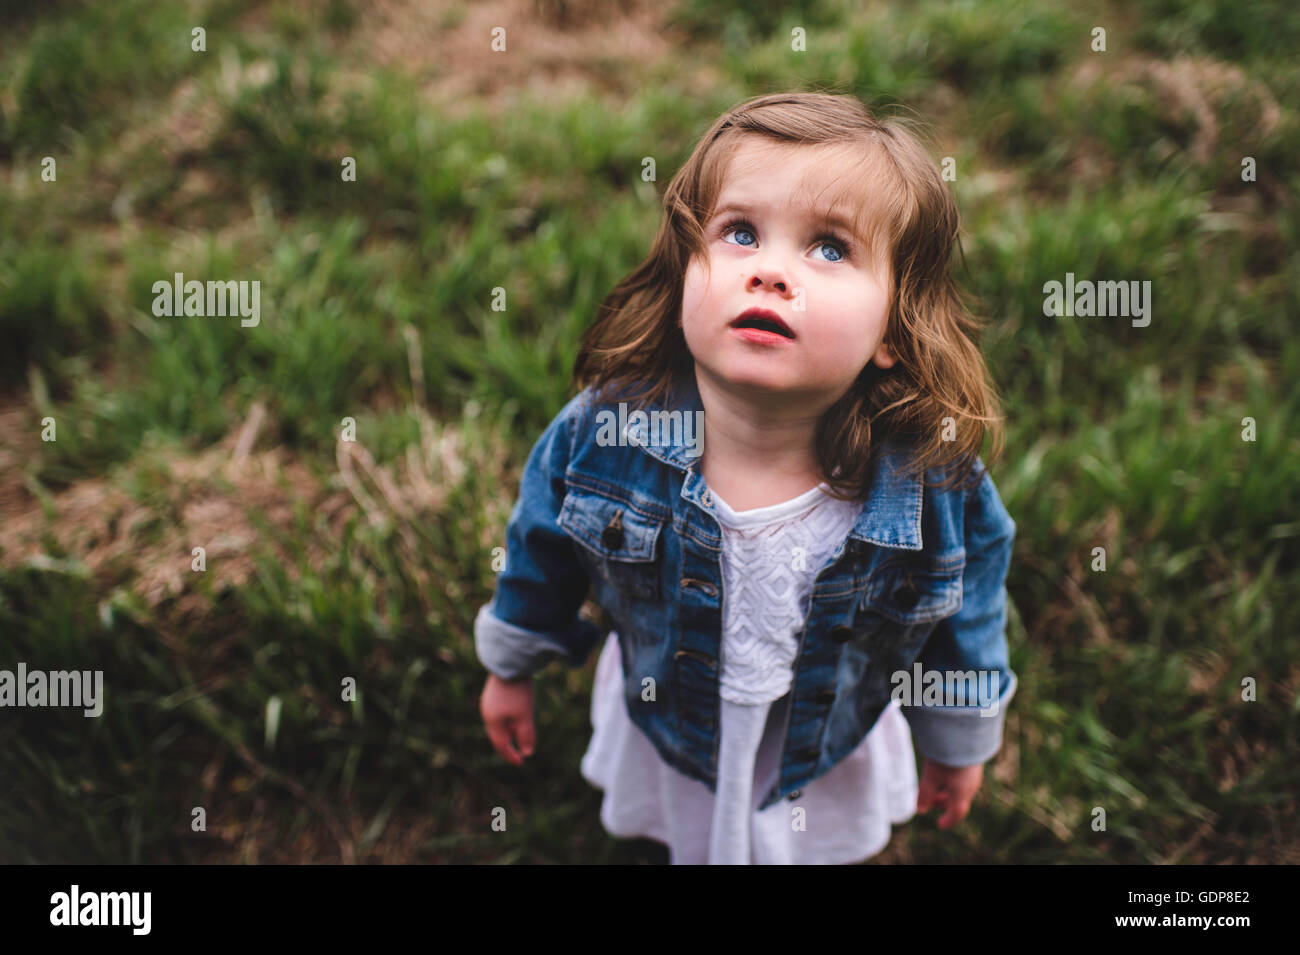 Young girl standing in field, looking up towards sky Stock Photo